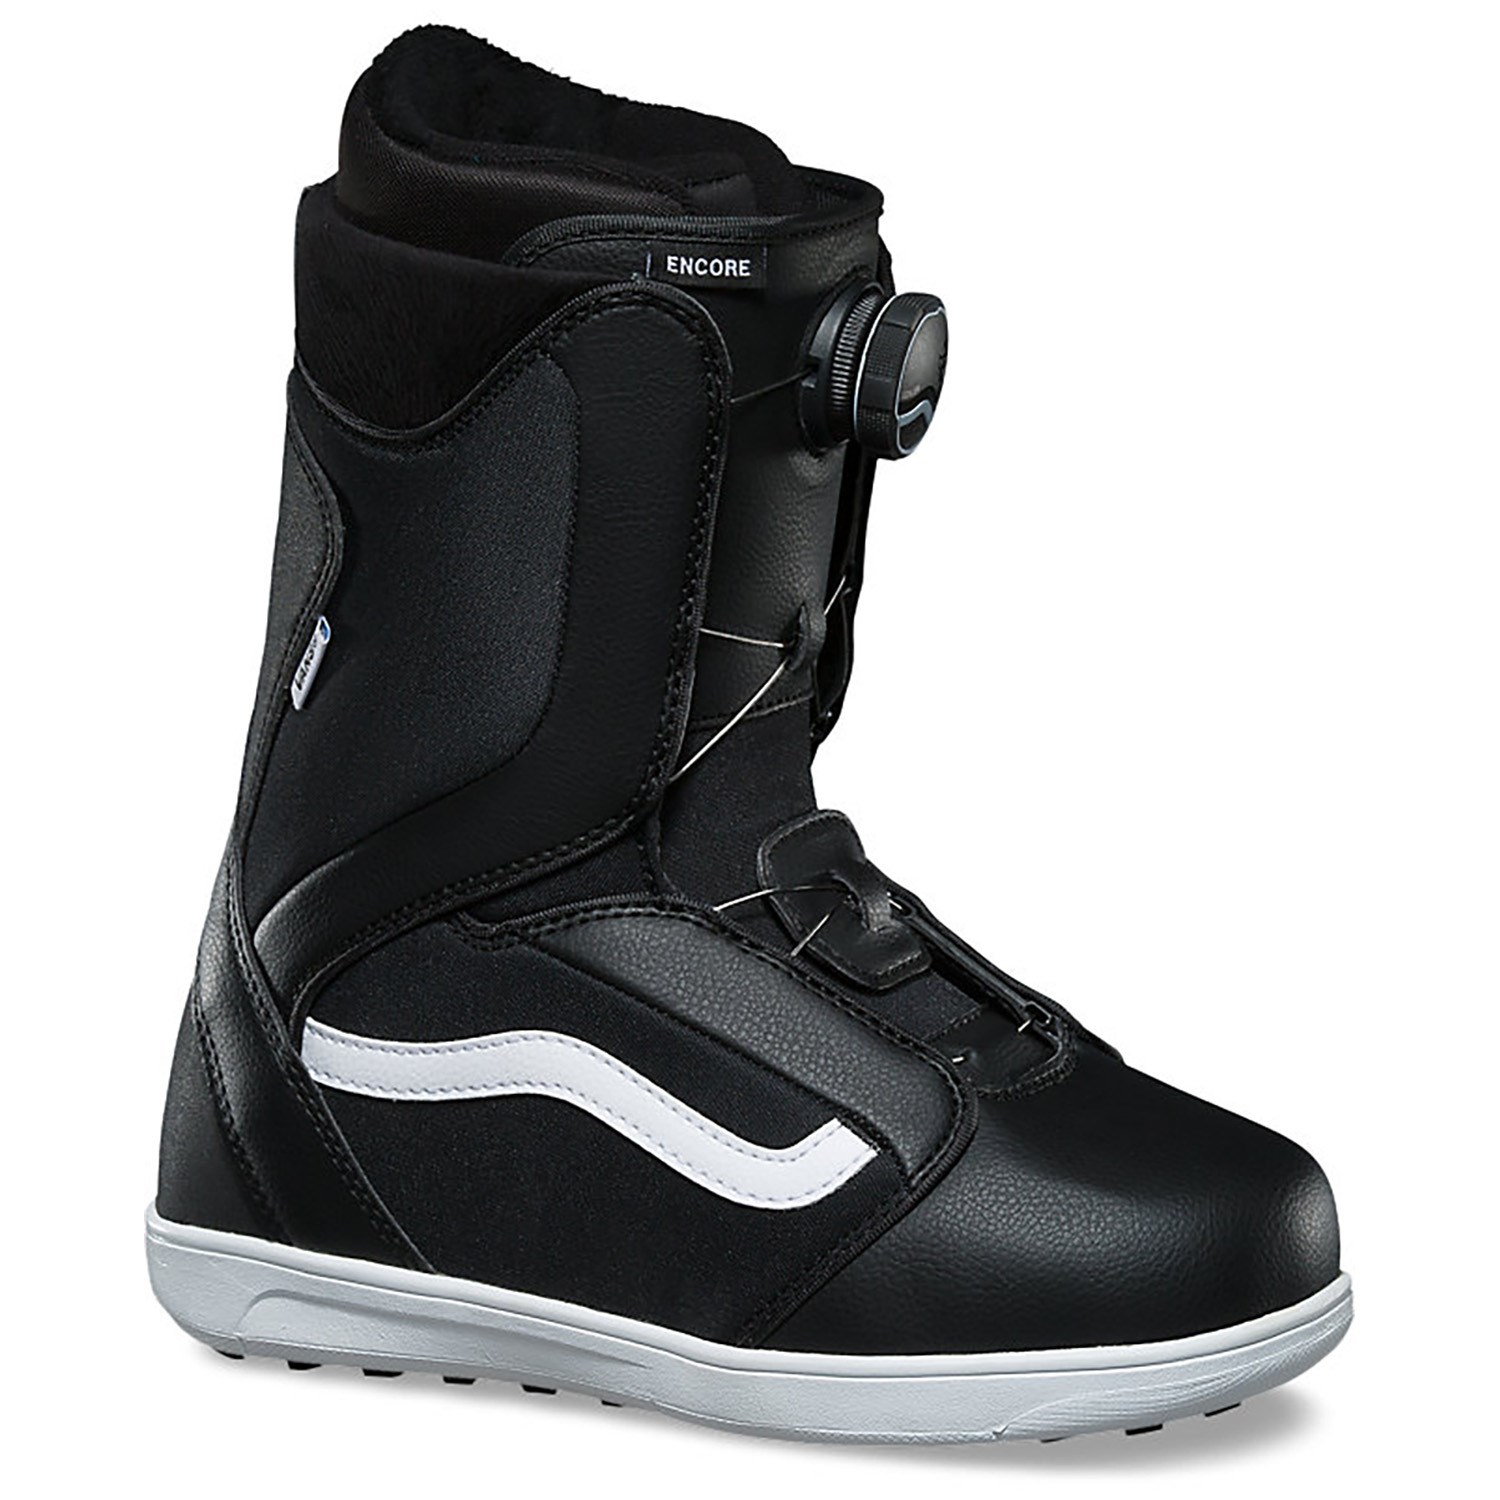 Vans snowboard boots- surfing time